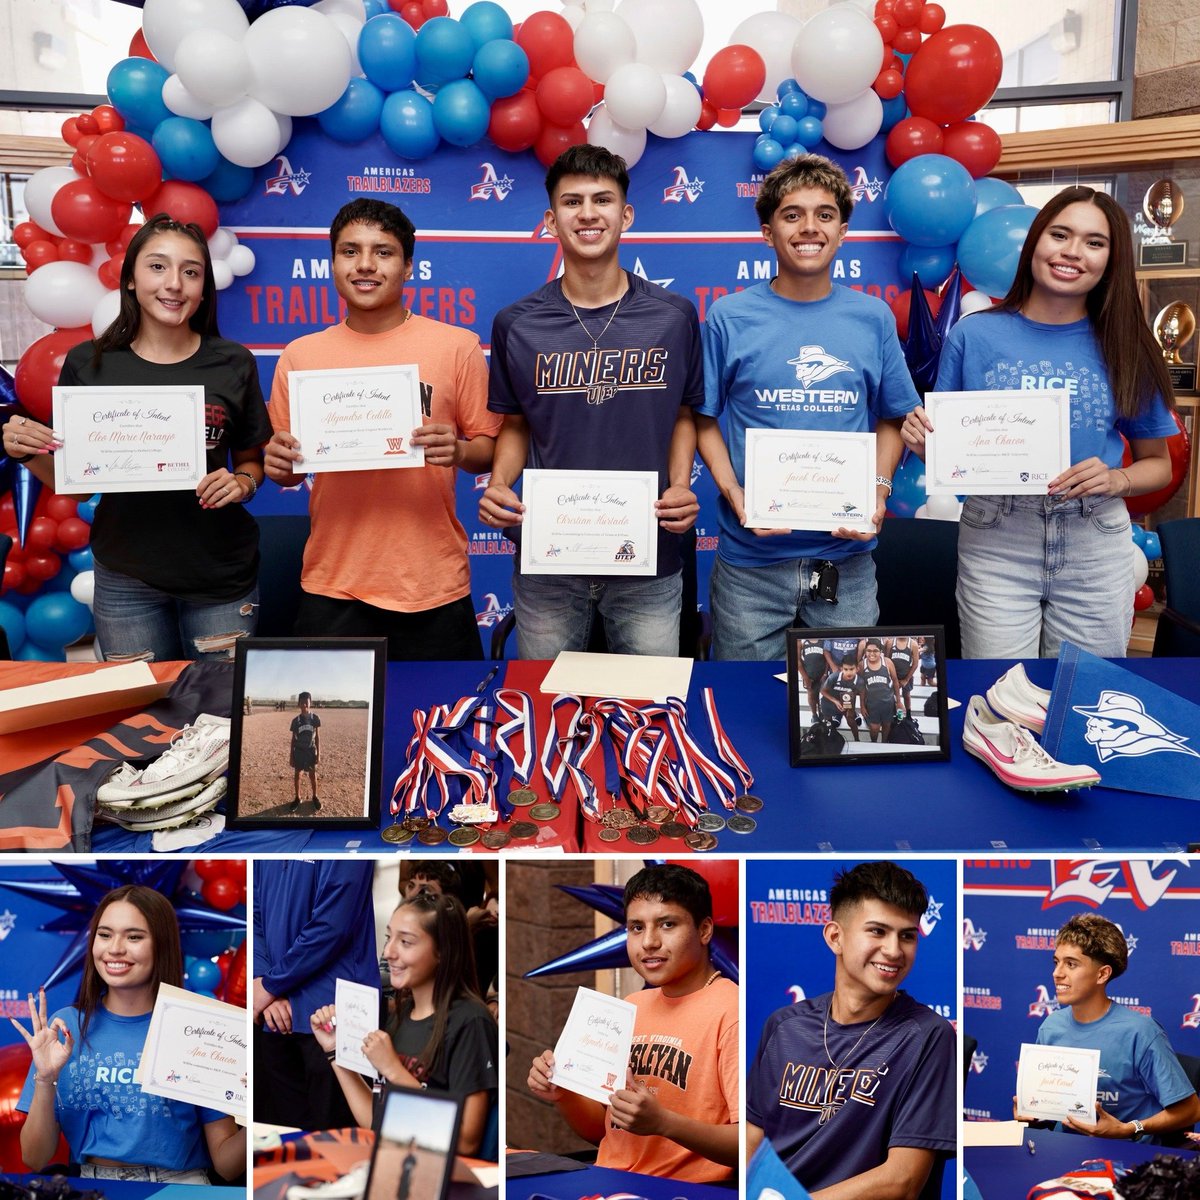 Americas High School had five student-athletes sign their letters of intent today to play sports and further their education at West Virginia Wesleyan College, Rice University, Western Texas College, Bethel College, and the University of TX at El Paso. Congrats, Trailblazers!